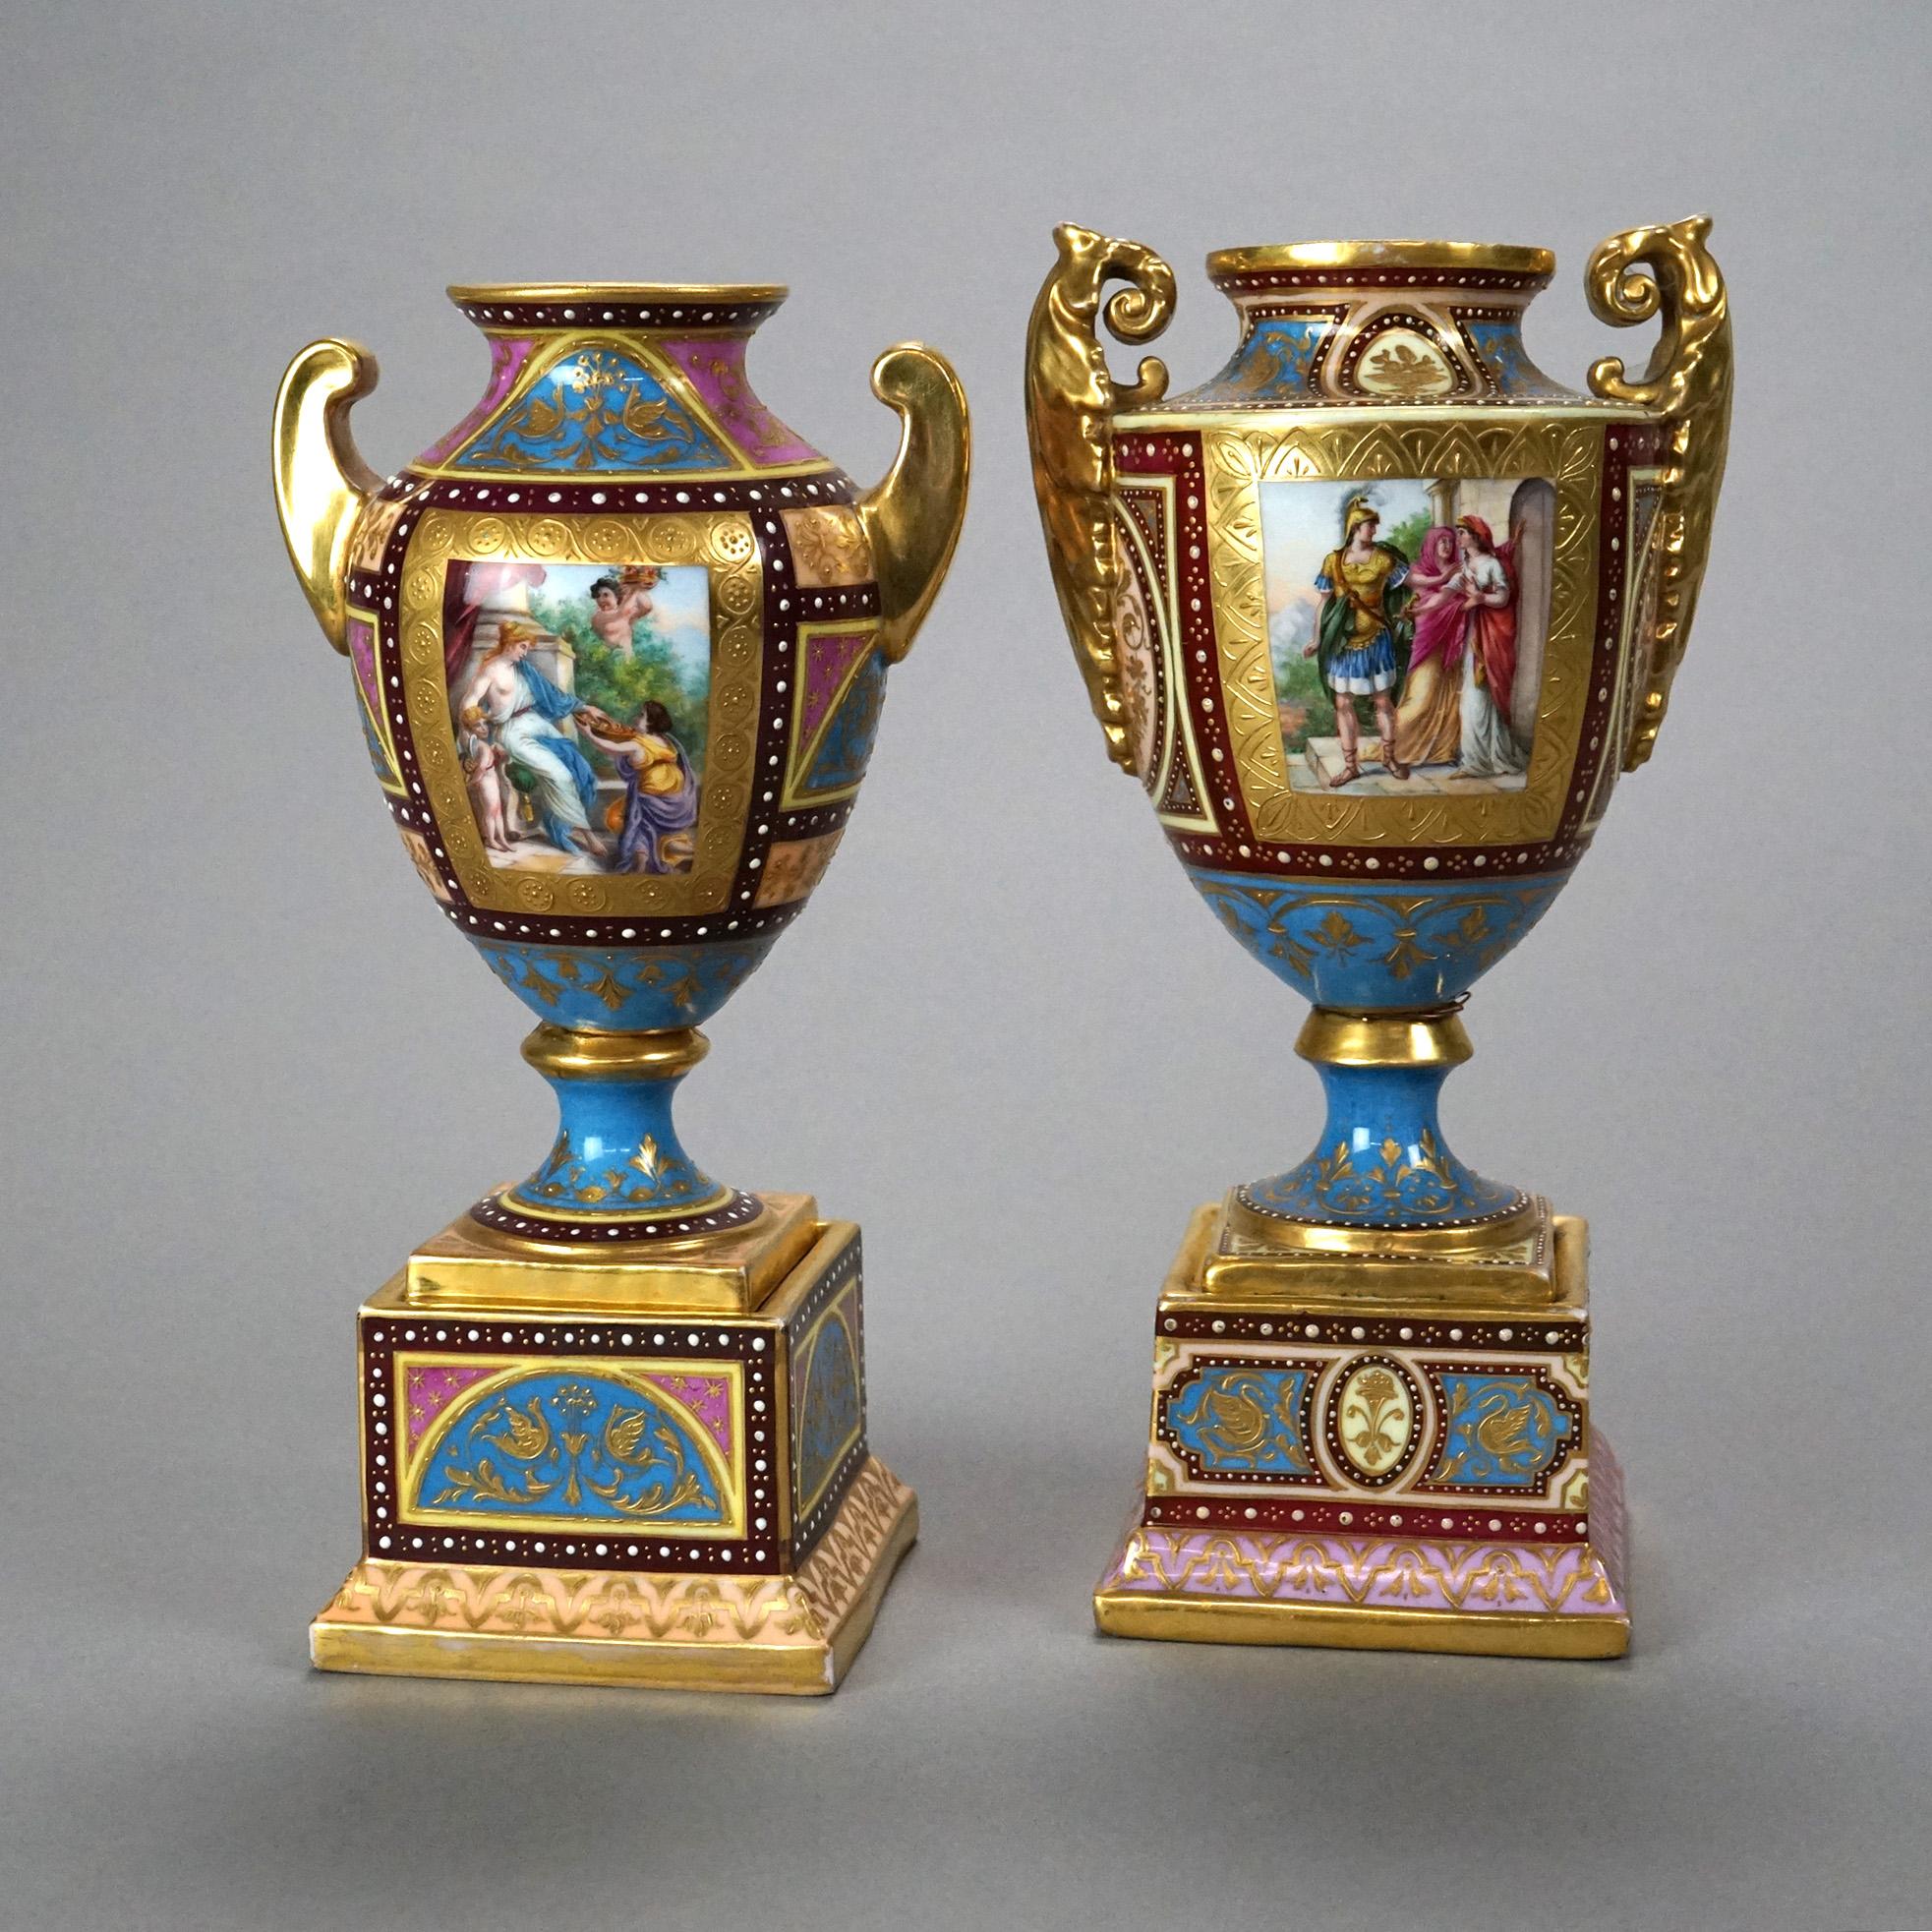 An antique pair of Austrian Royal Vienna urns offer porcelain construction with hand painted genre scenes, gilt highlights, double handles and beehive shield maker mark on base as photographed, c1890

Measures- larger 8.5''H x 4.25''W x 3.5''D;